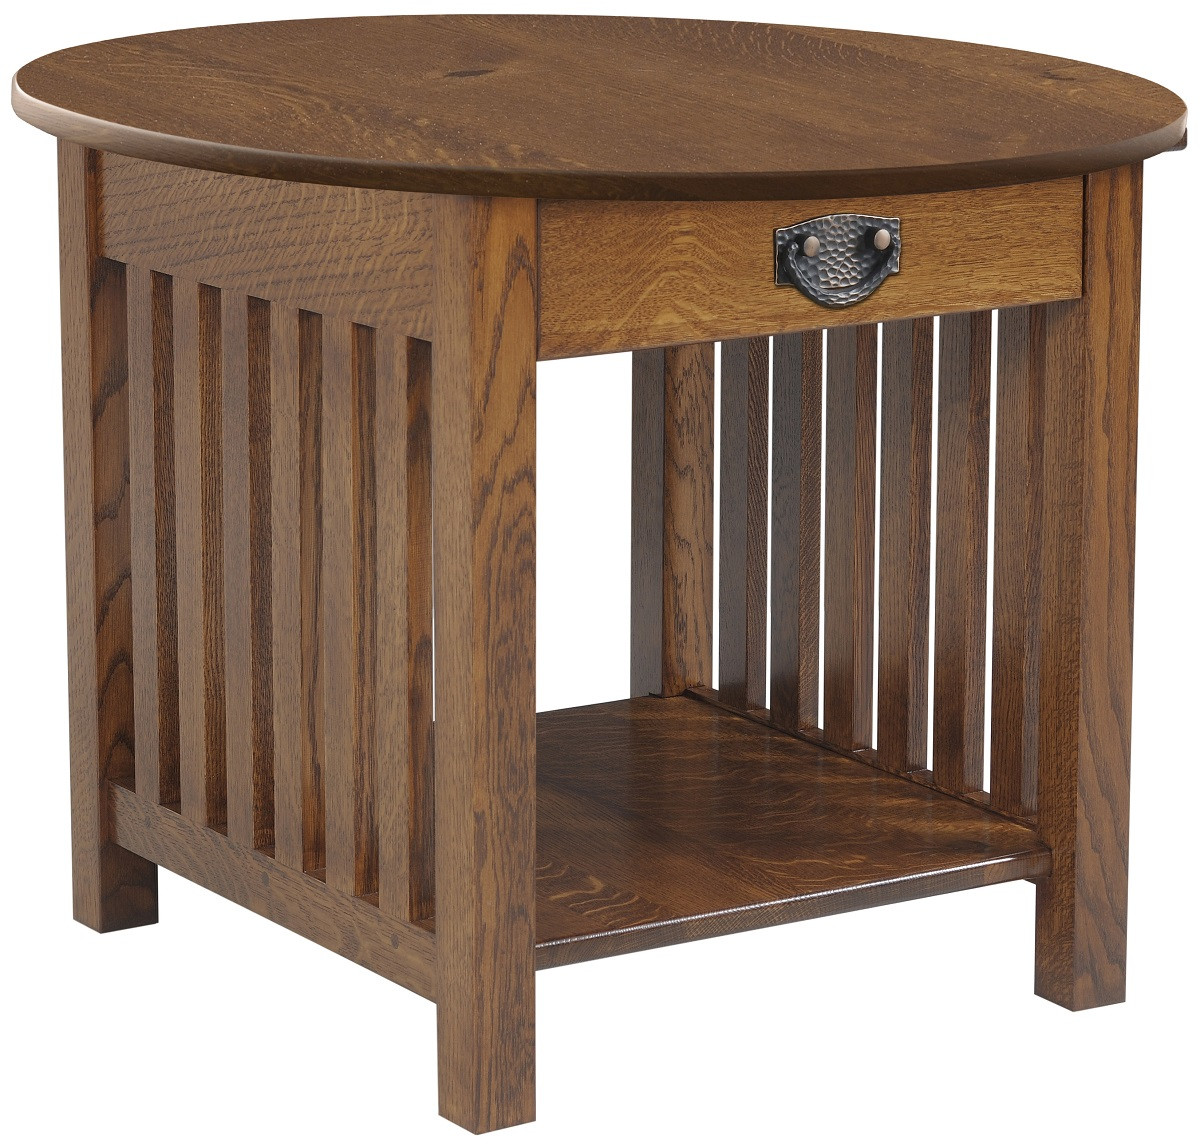 Arenas Valley Round End Table